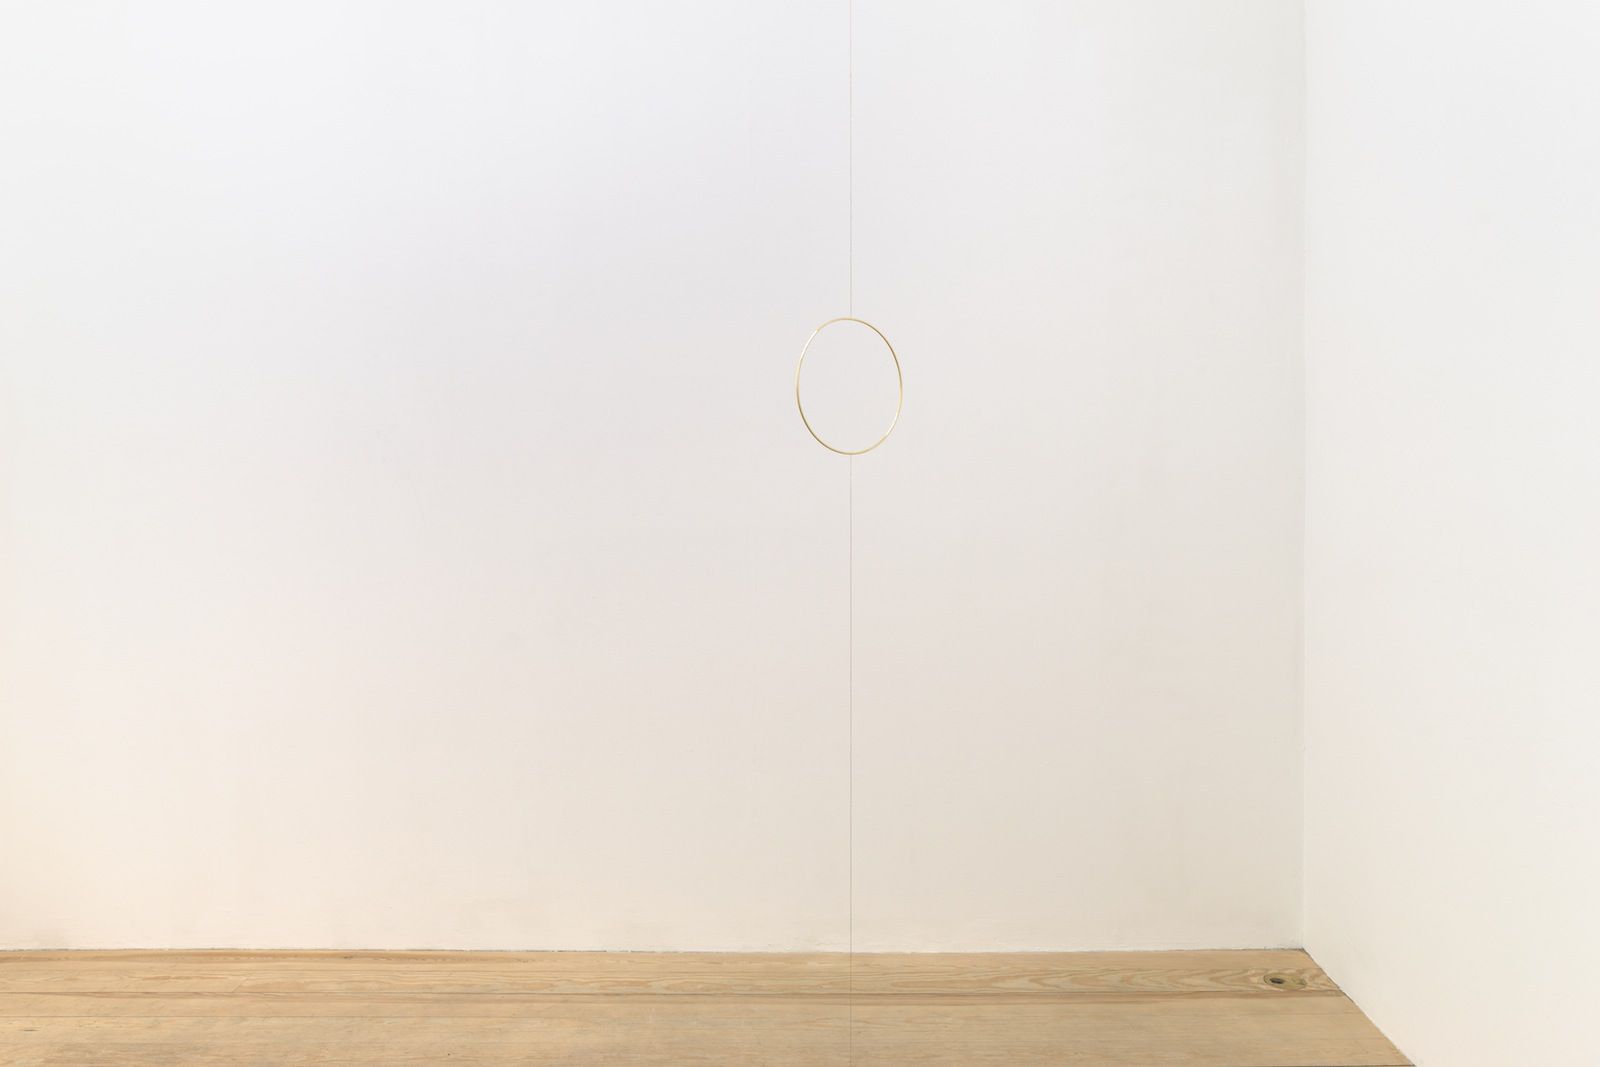 Stephen Lichty, Ring, 2013, bronze and string, dimensions variable, x 10 x 3/16 (dimensions variable x 25.4 x 0.5 cm)